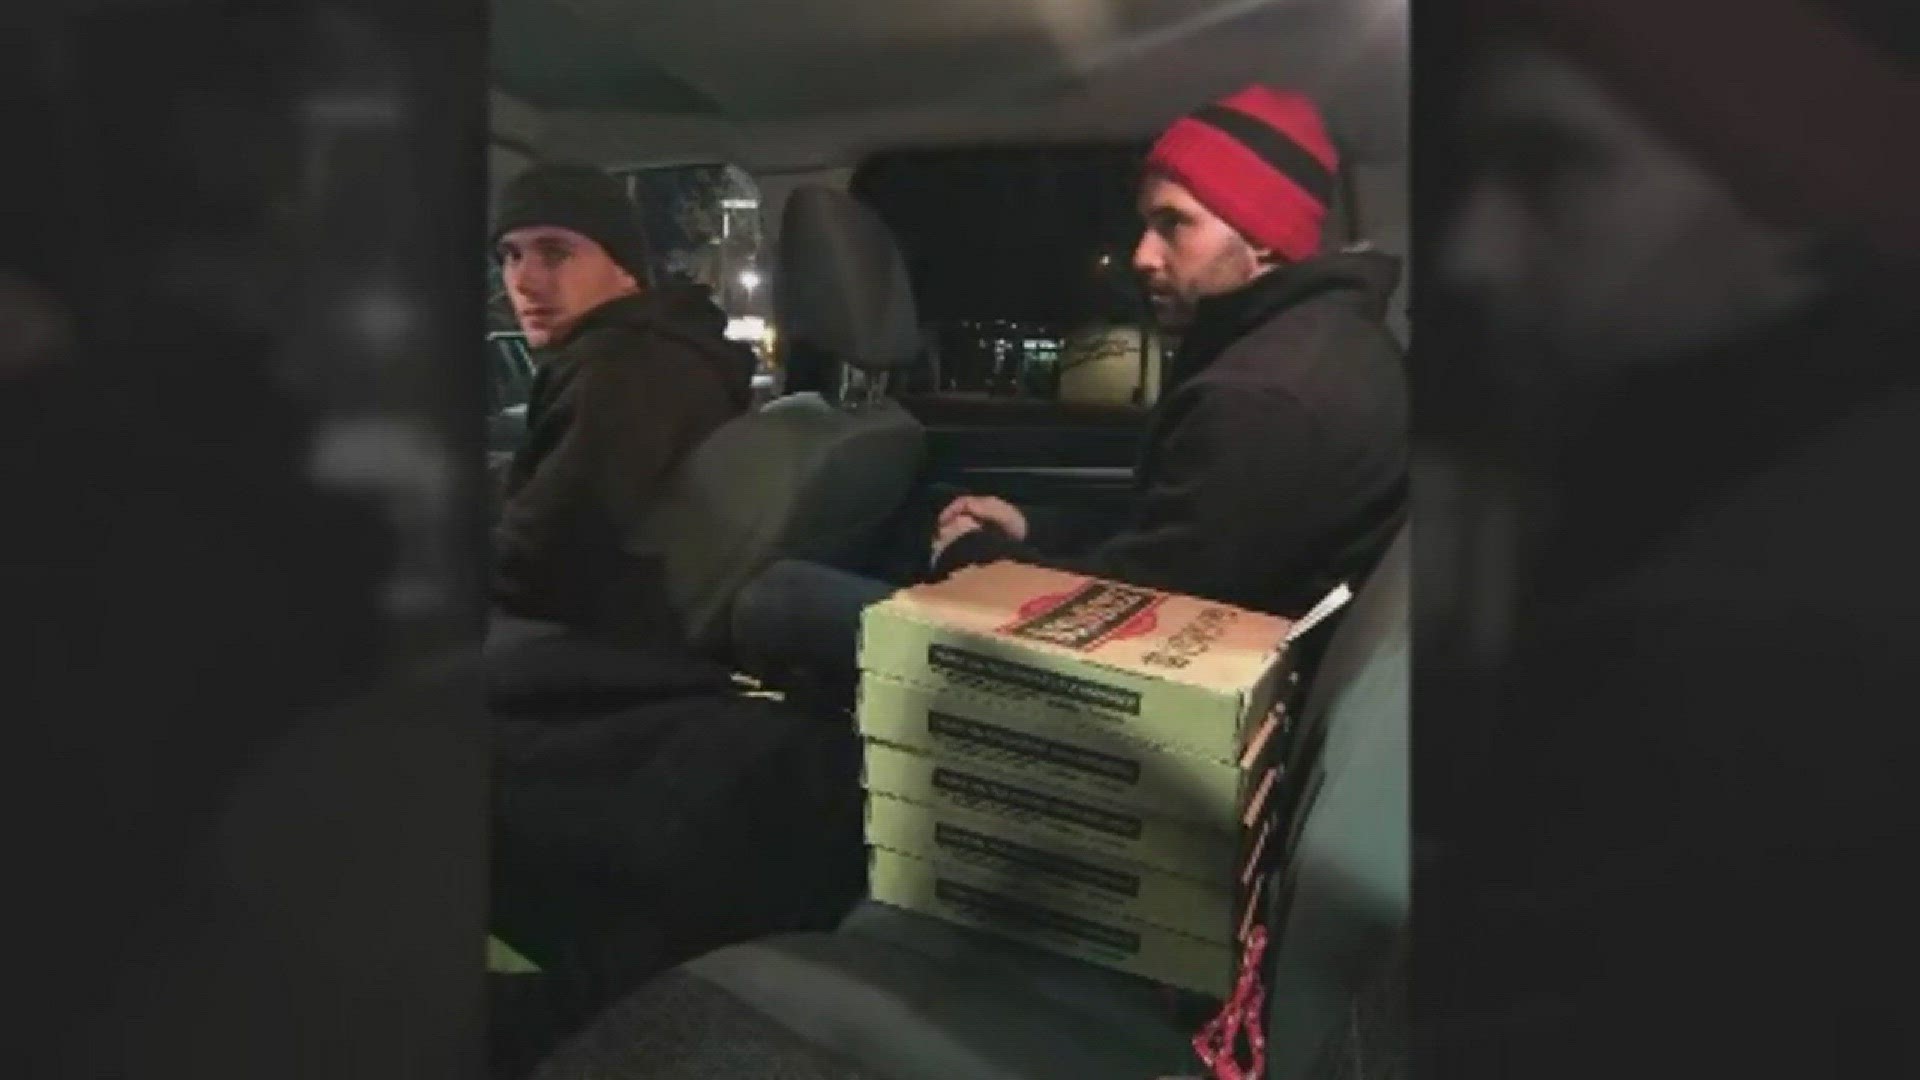 VIDEO: Friends spread holiday cheer through pizza in Louisville